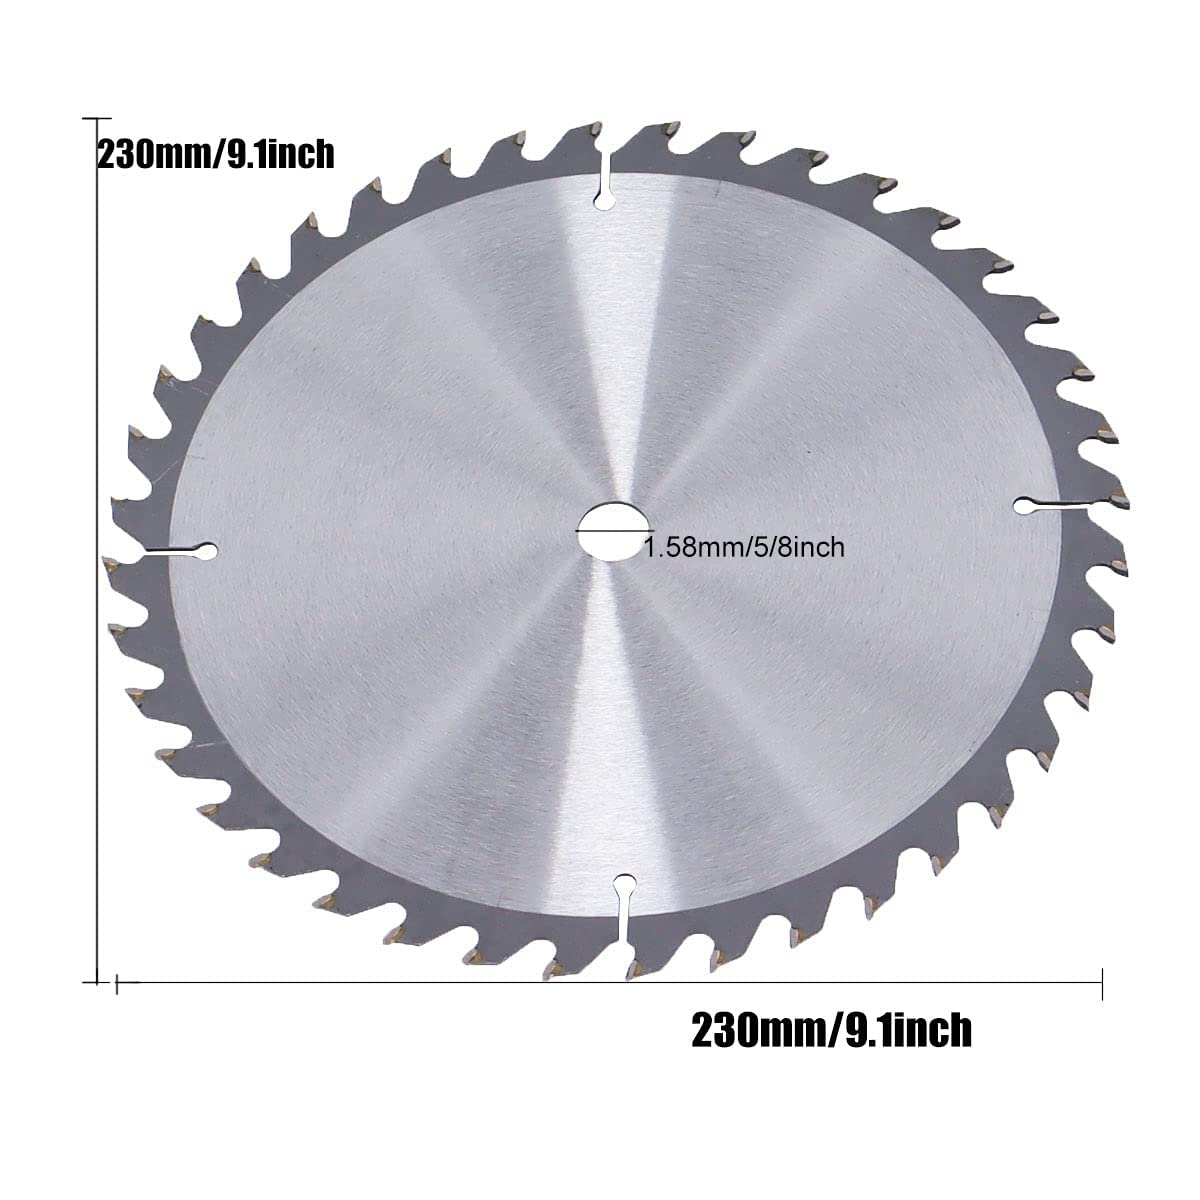 Table Saw Blade 𝑼𝒑𝒈𝒓𝒂𝒅𝒆 9 inch 5/8 Arbor 40T Universal Fit Common Steel Blade for Wooden (2 Pack) 9" Circular Saw Blade